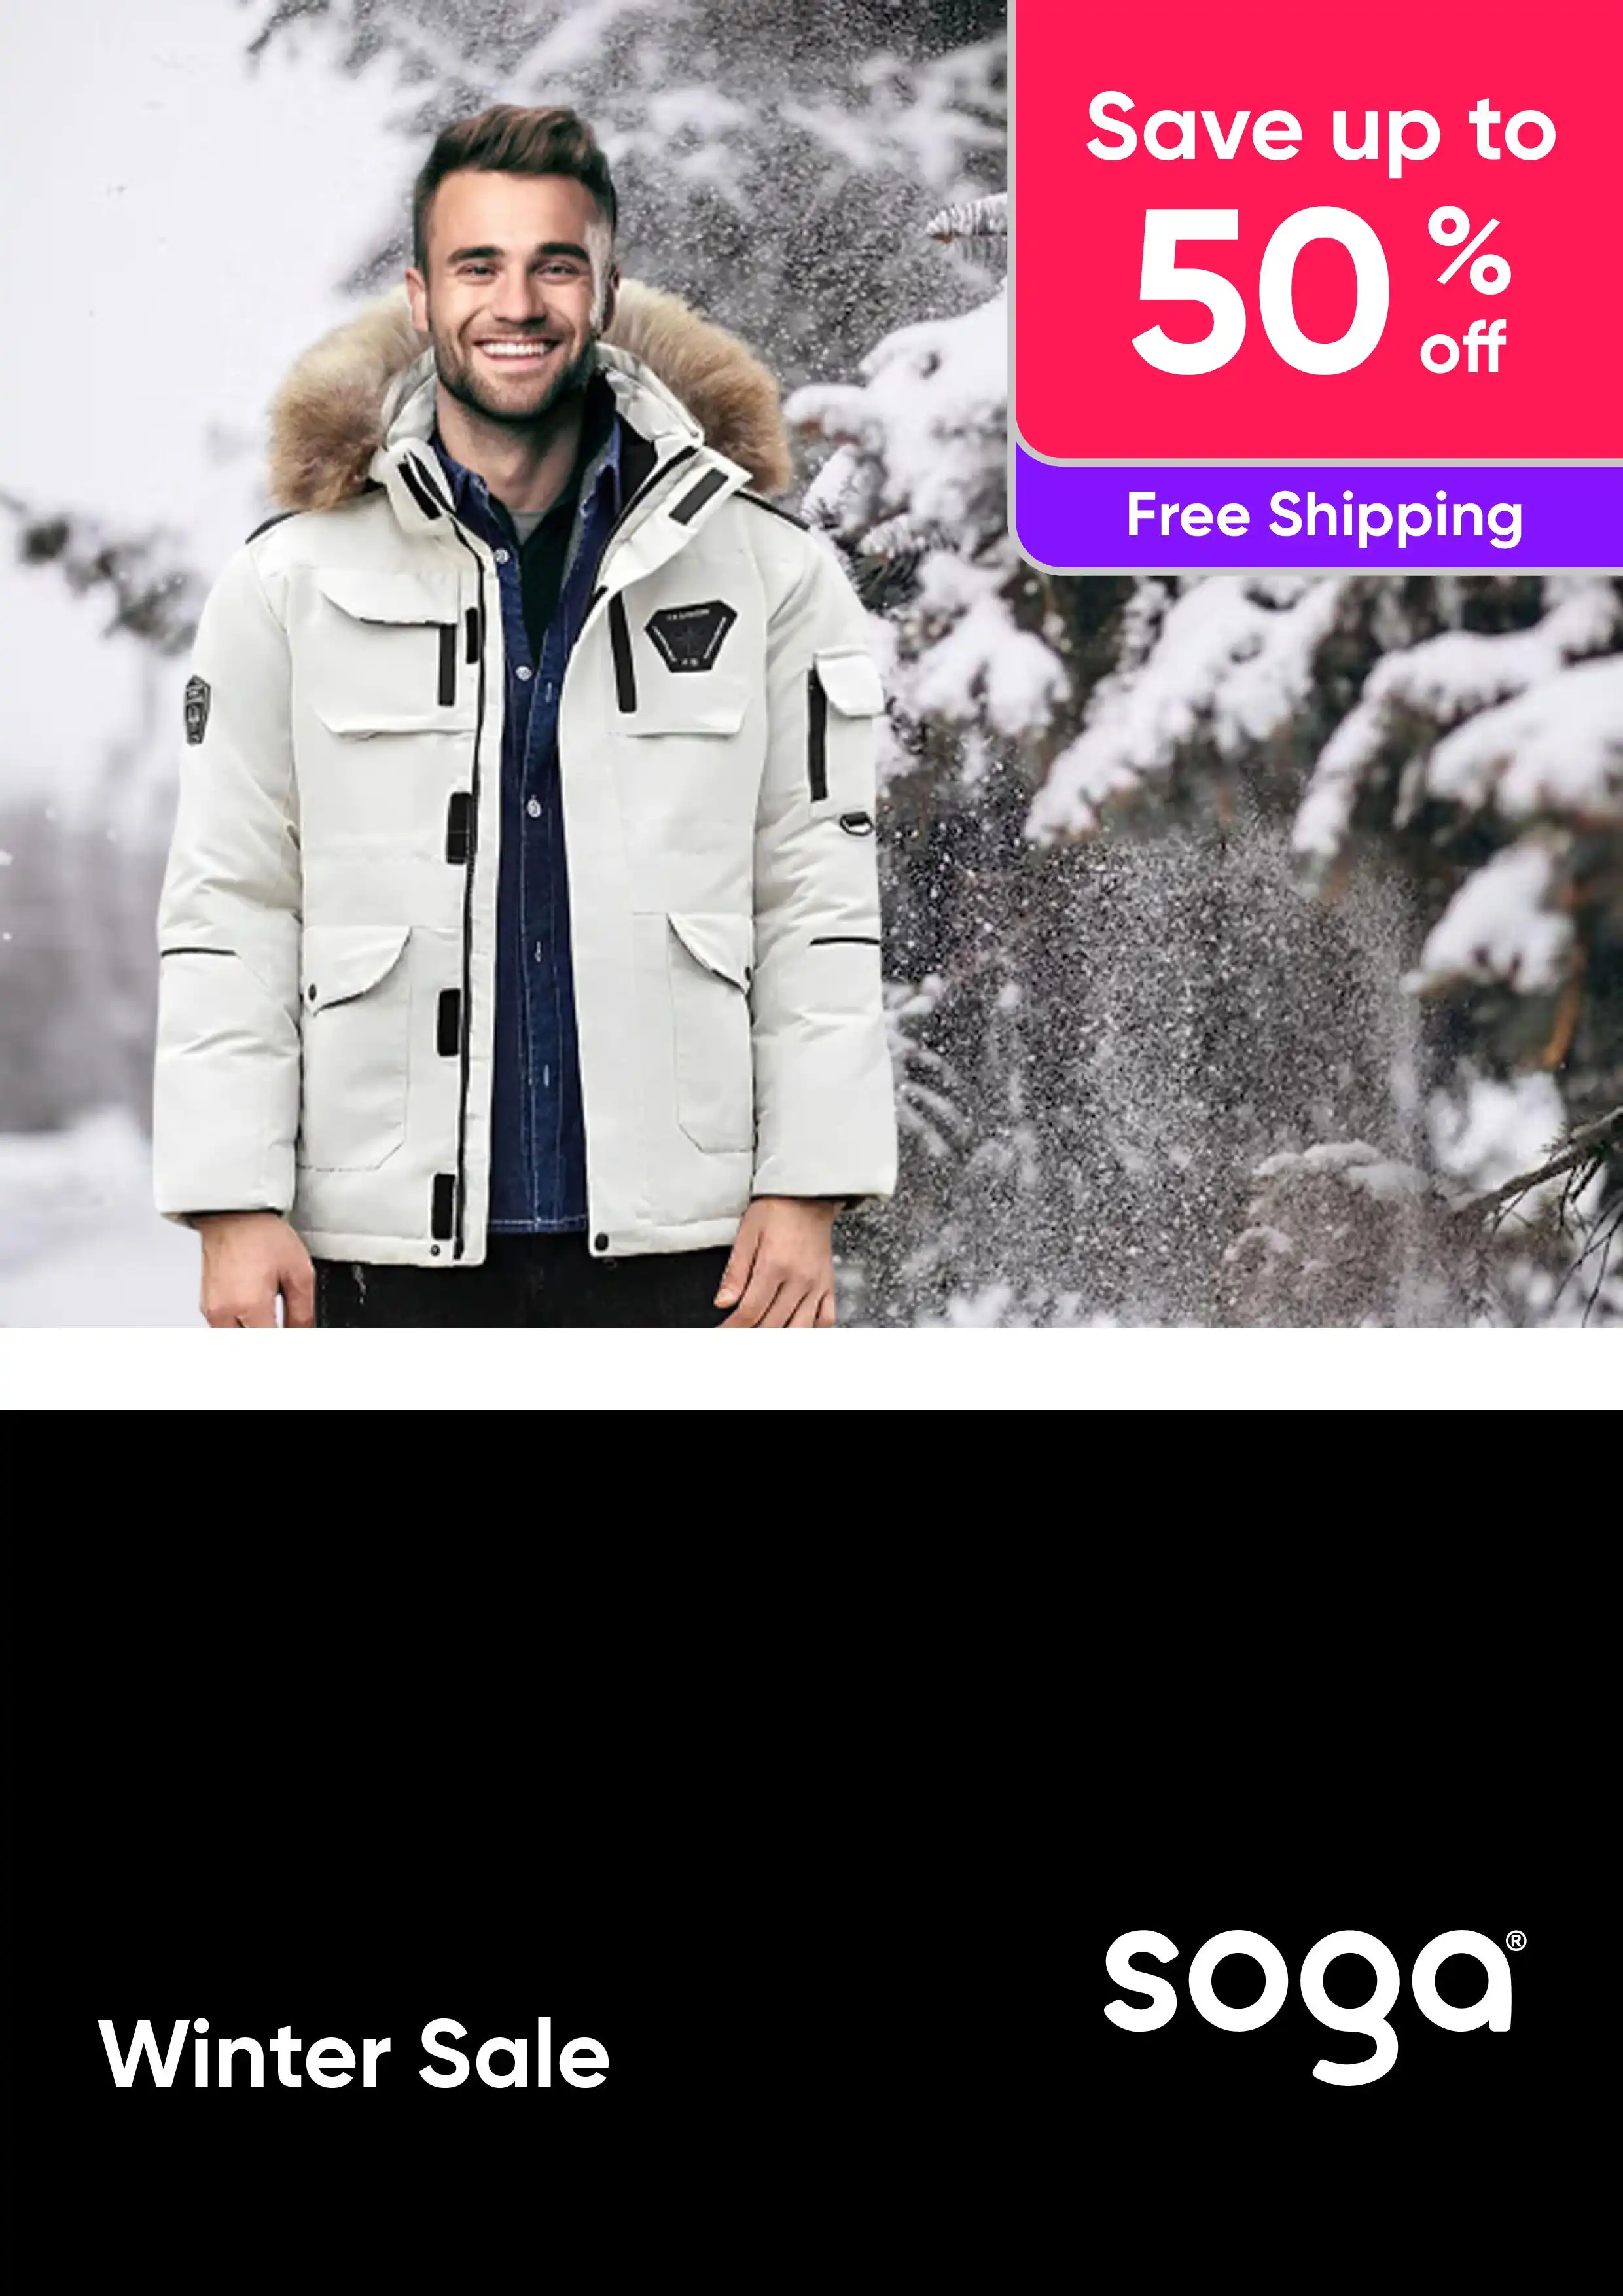 Soga Winter Sale - Up To 50% Off